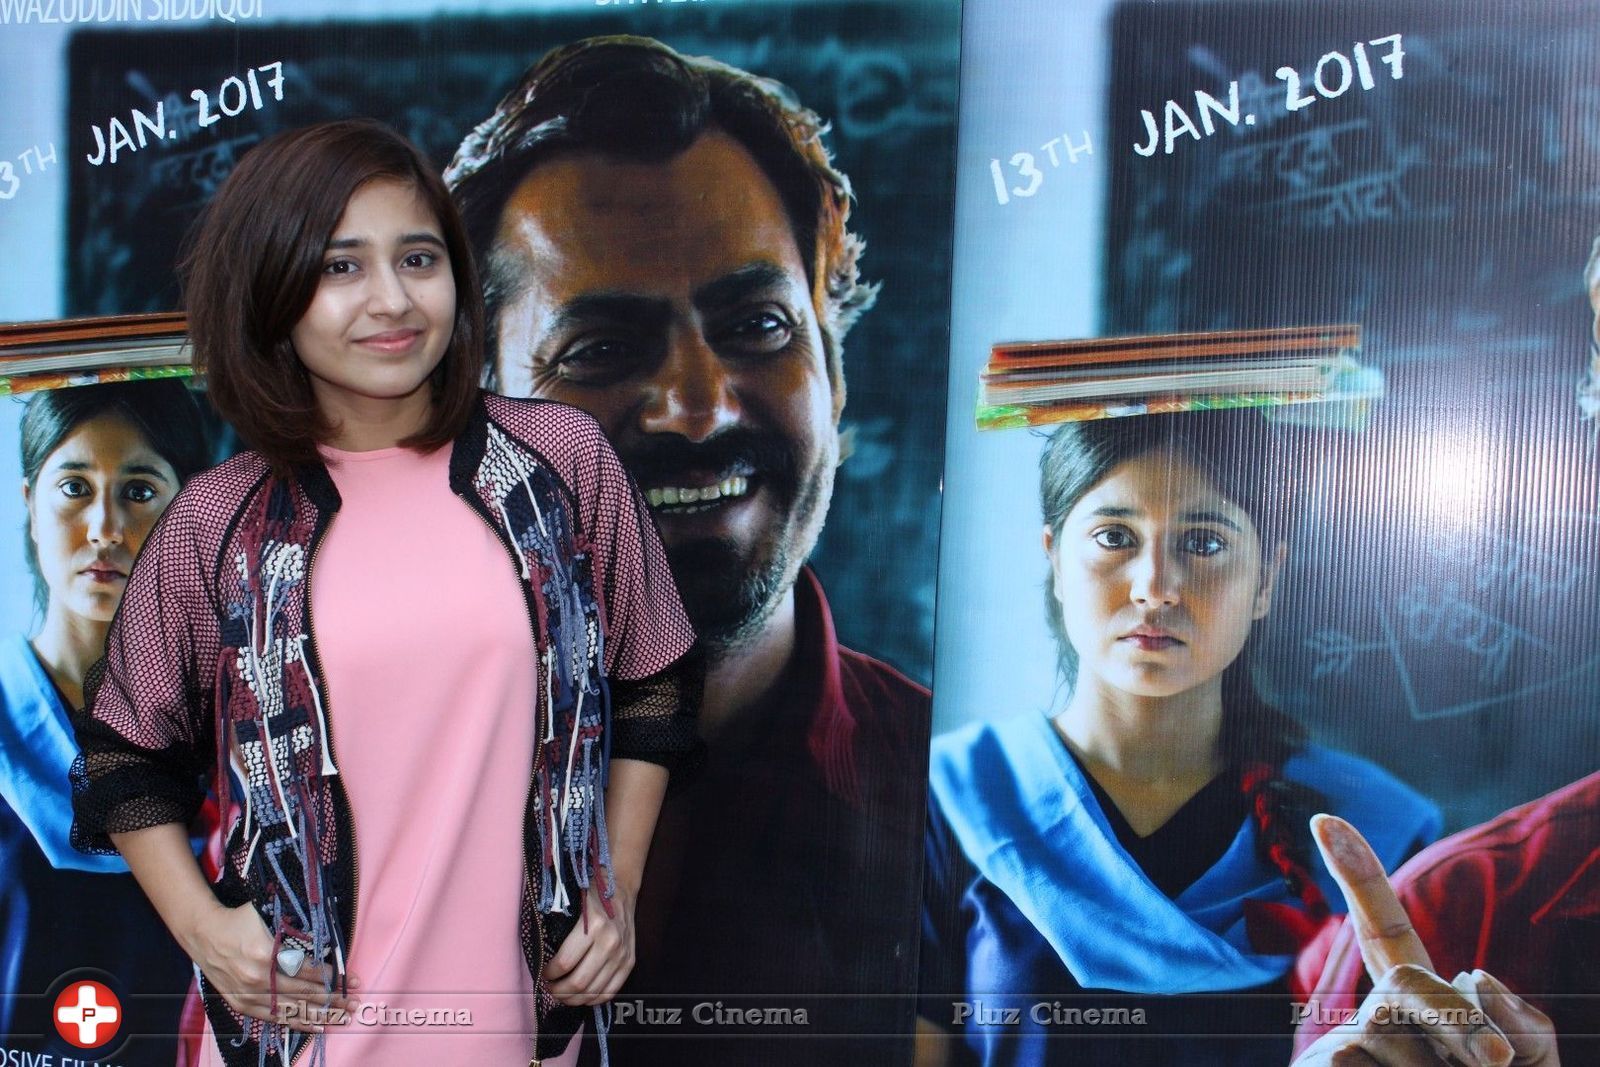 Shweta Tripathi - Haraamkhor Team Interview Pictures | Picture 1458071